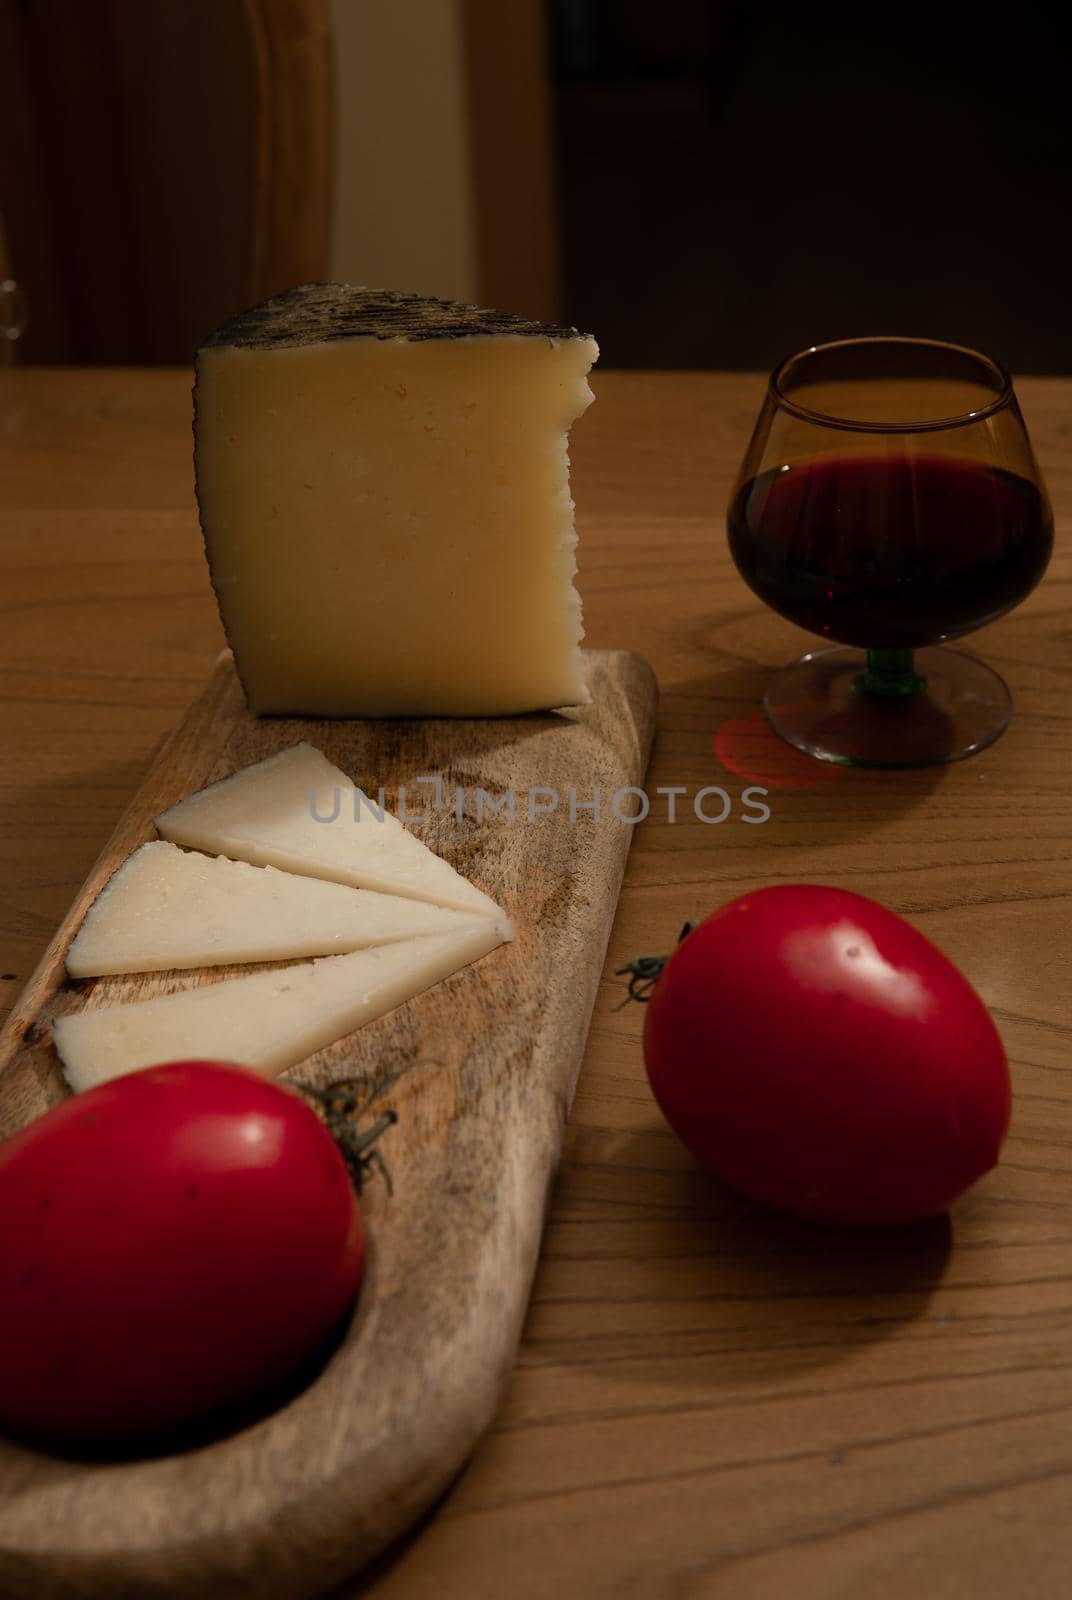 Cheese wedge with tomato, bread sticks and red wine